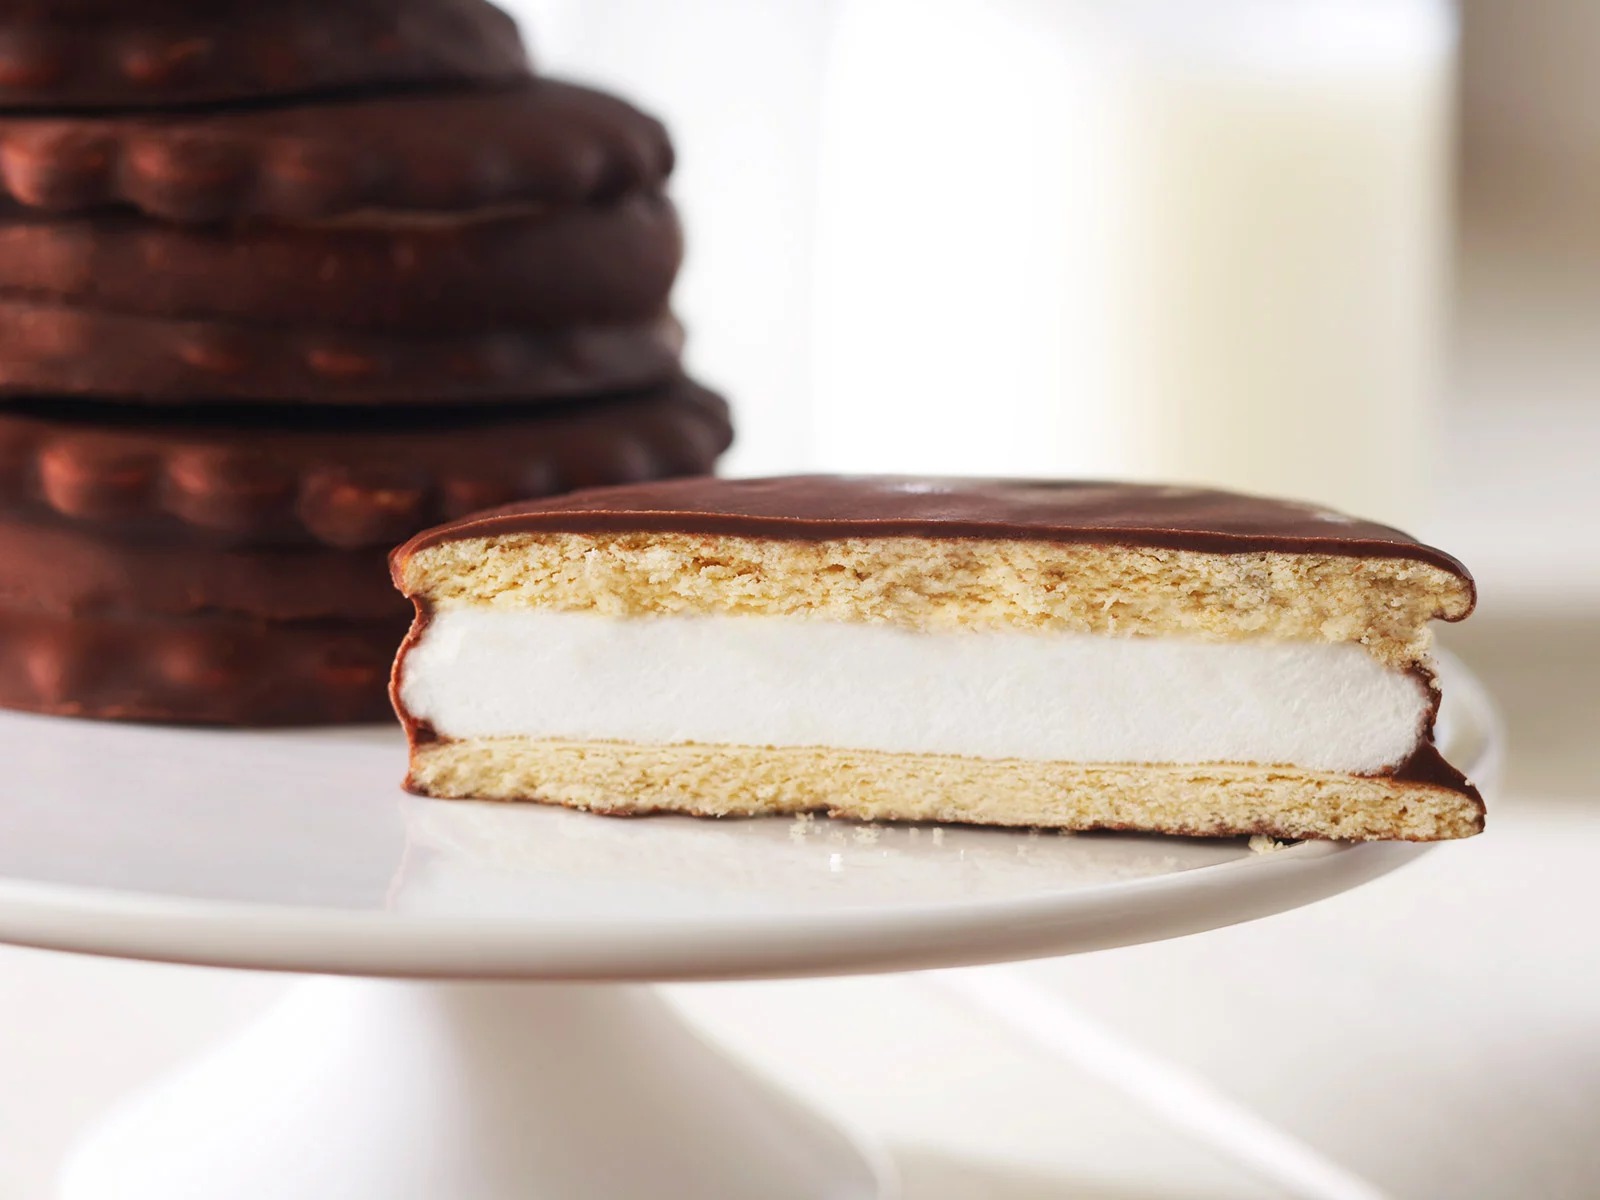 🍩 Believe It or Not, We Know Your Exact Age Based on How You Rate These American Desserts Moon Pie